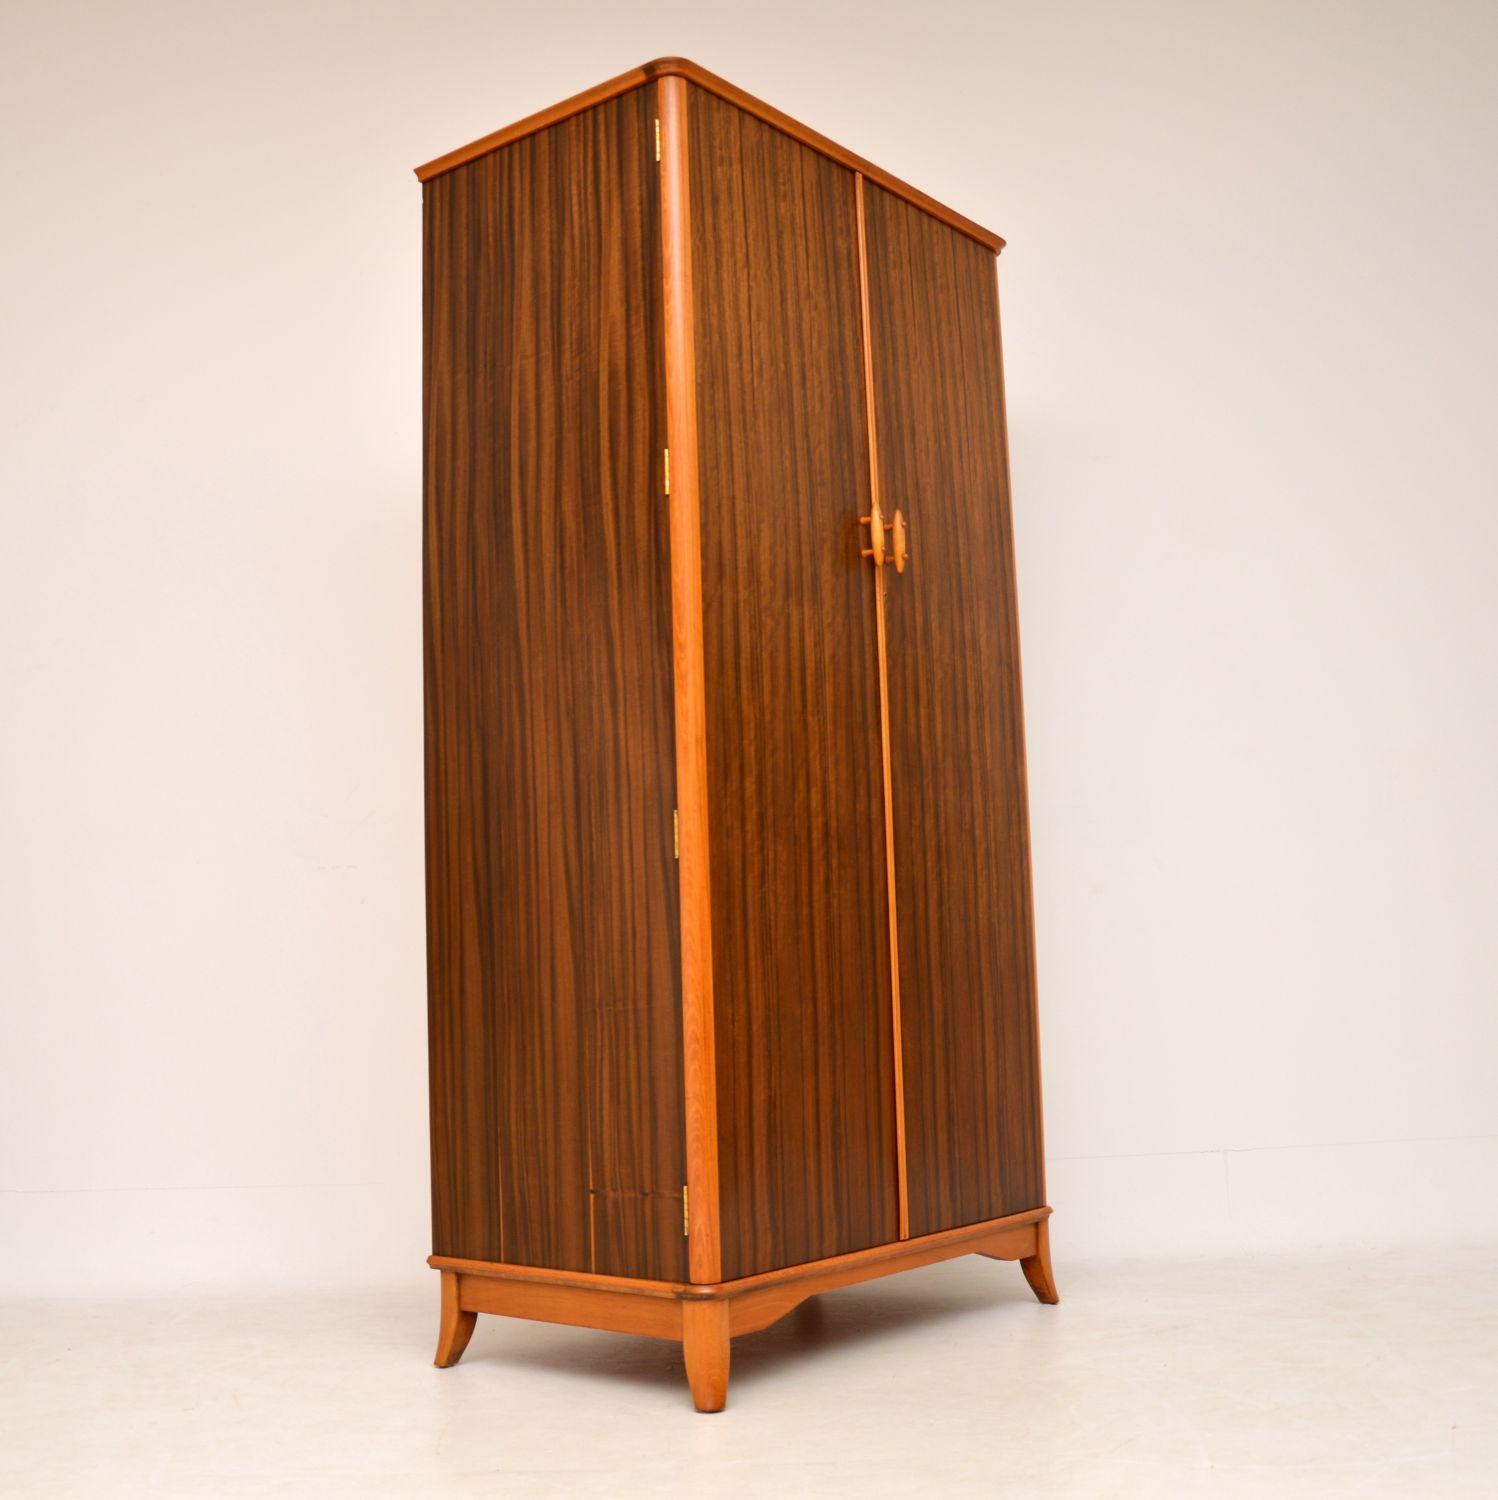 A stunning vintage wardrobe in walnut and contrasting beech, this was made by Vesper furniture in England during the 1950s-1960s. It is of amazing quality, with lots of nice features. The walnut has a beautiful colour and grain patterns, the handles